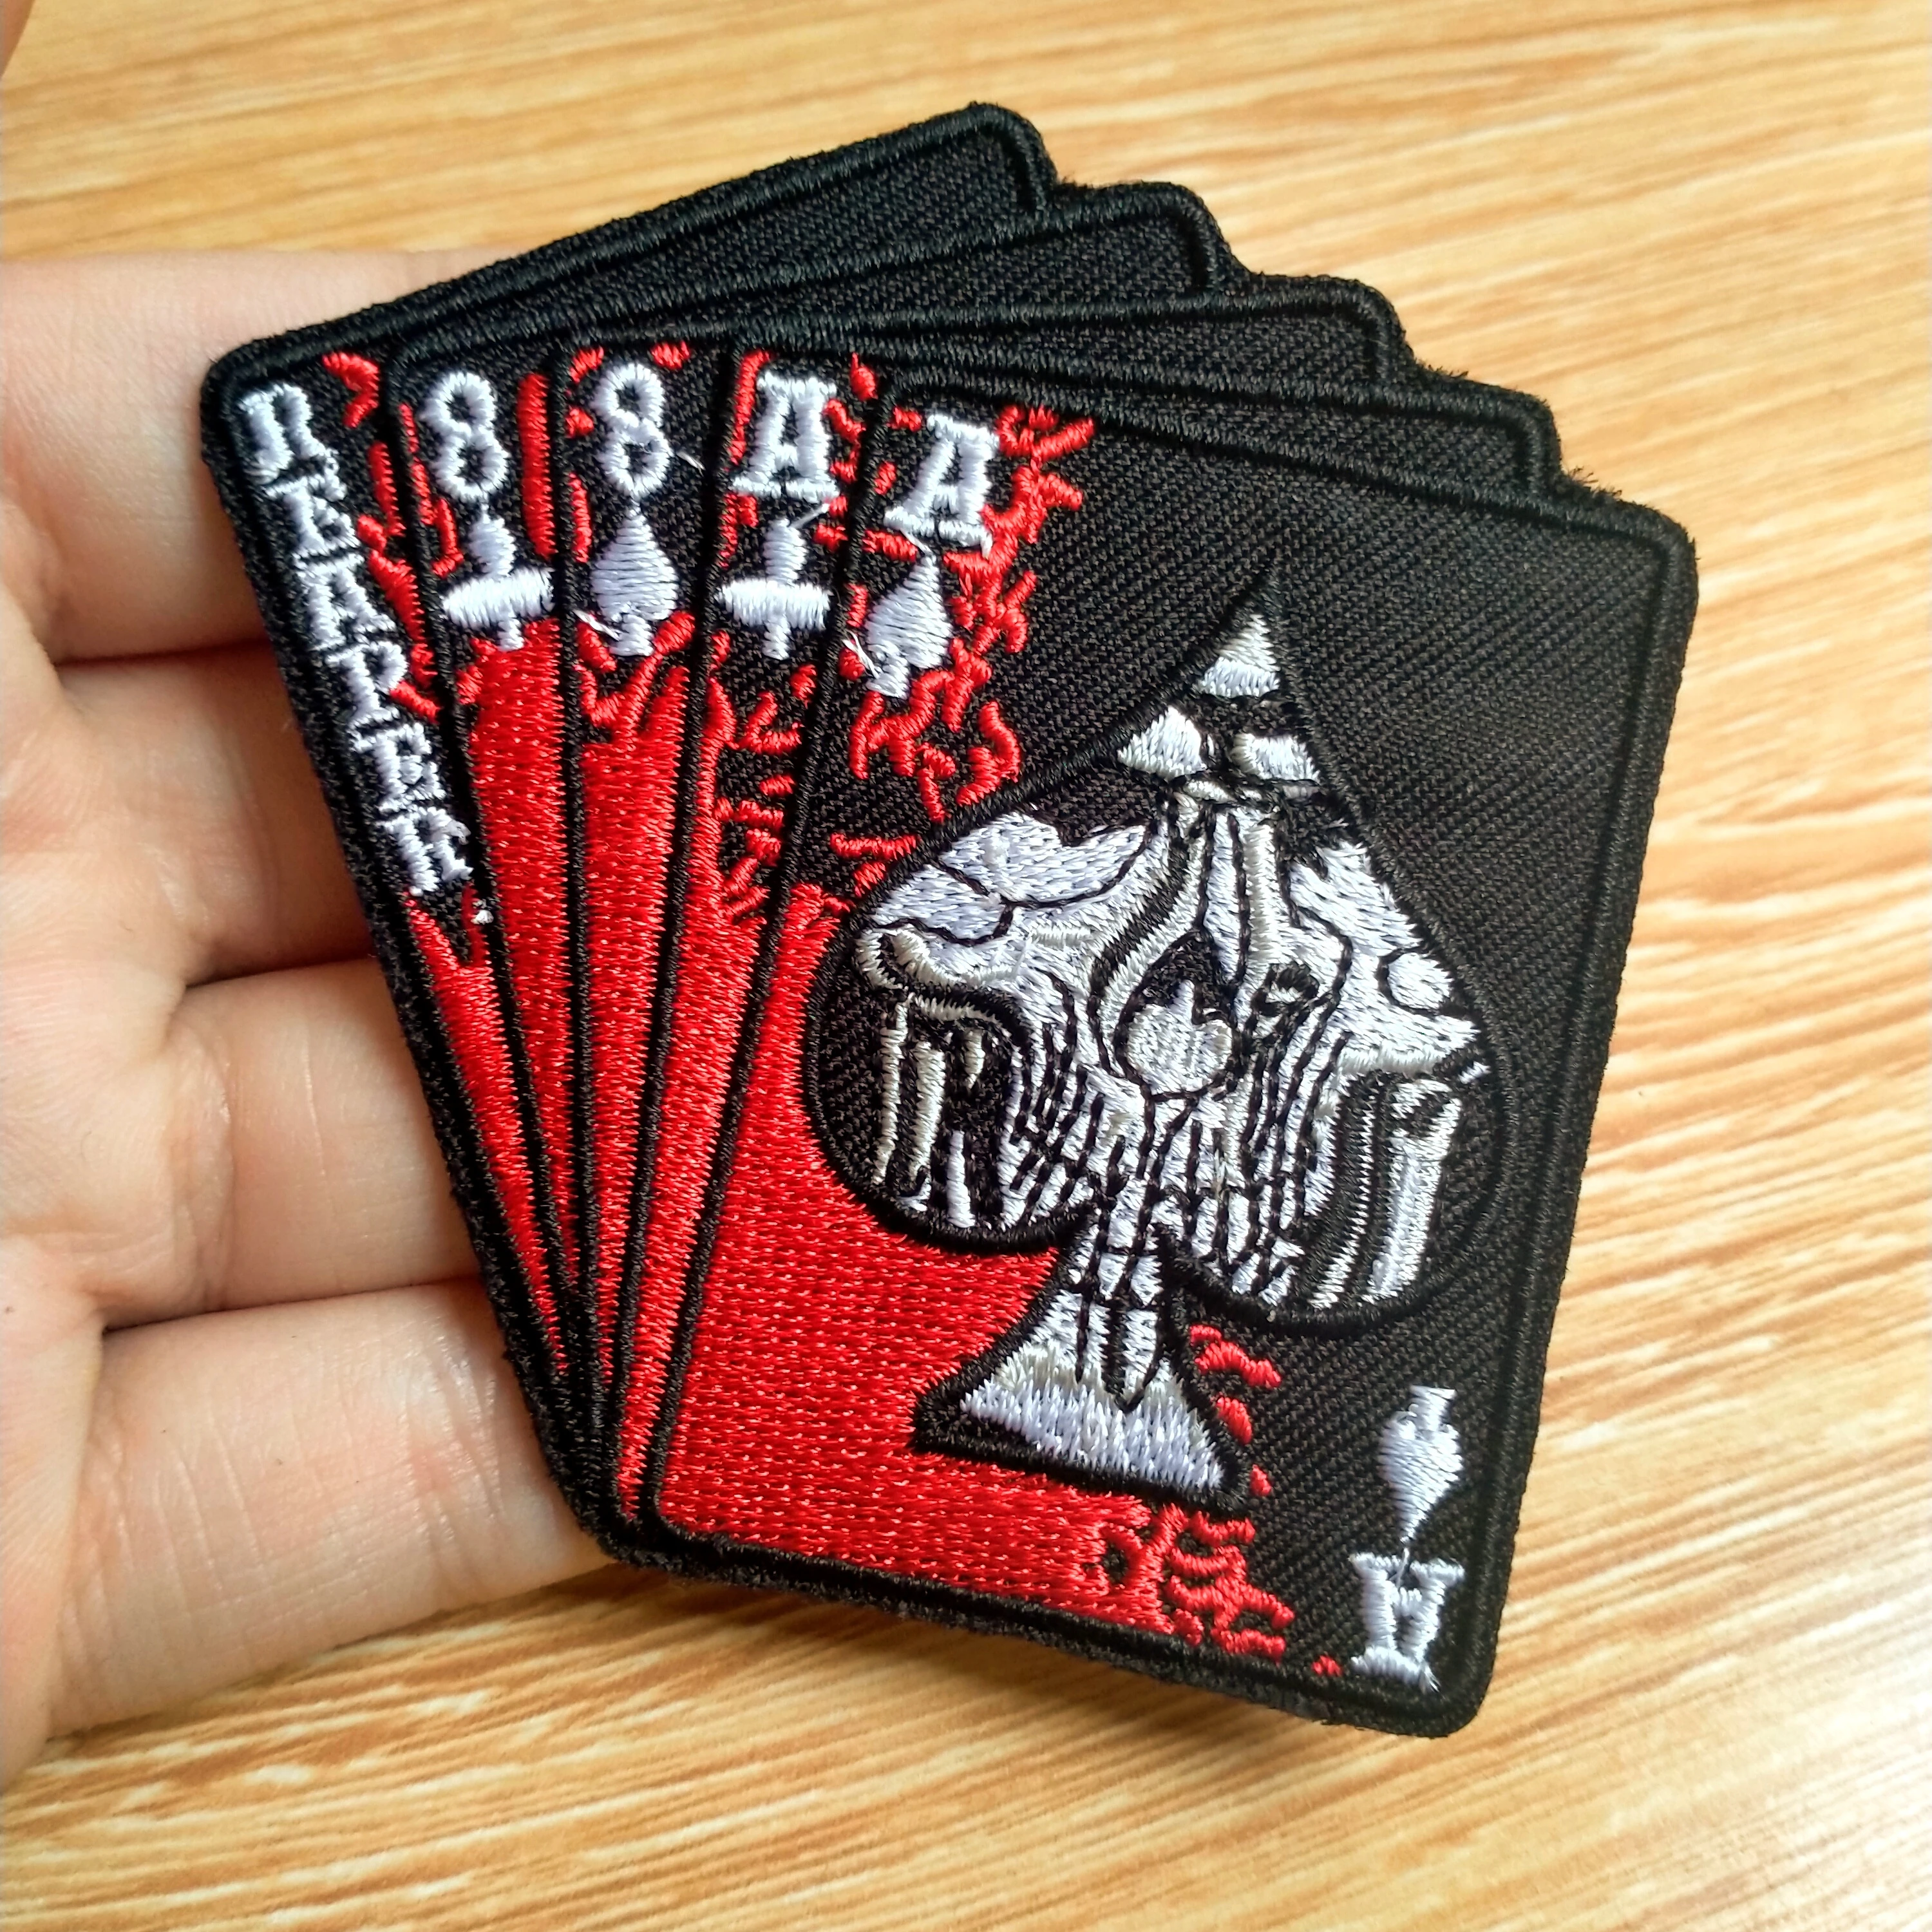 Joker Punk Skull Patches On Clothes Poker Iron On Patches For Clothing Stripe Applique Badges For Clothes Embroidery Patch